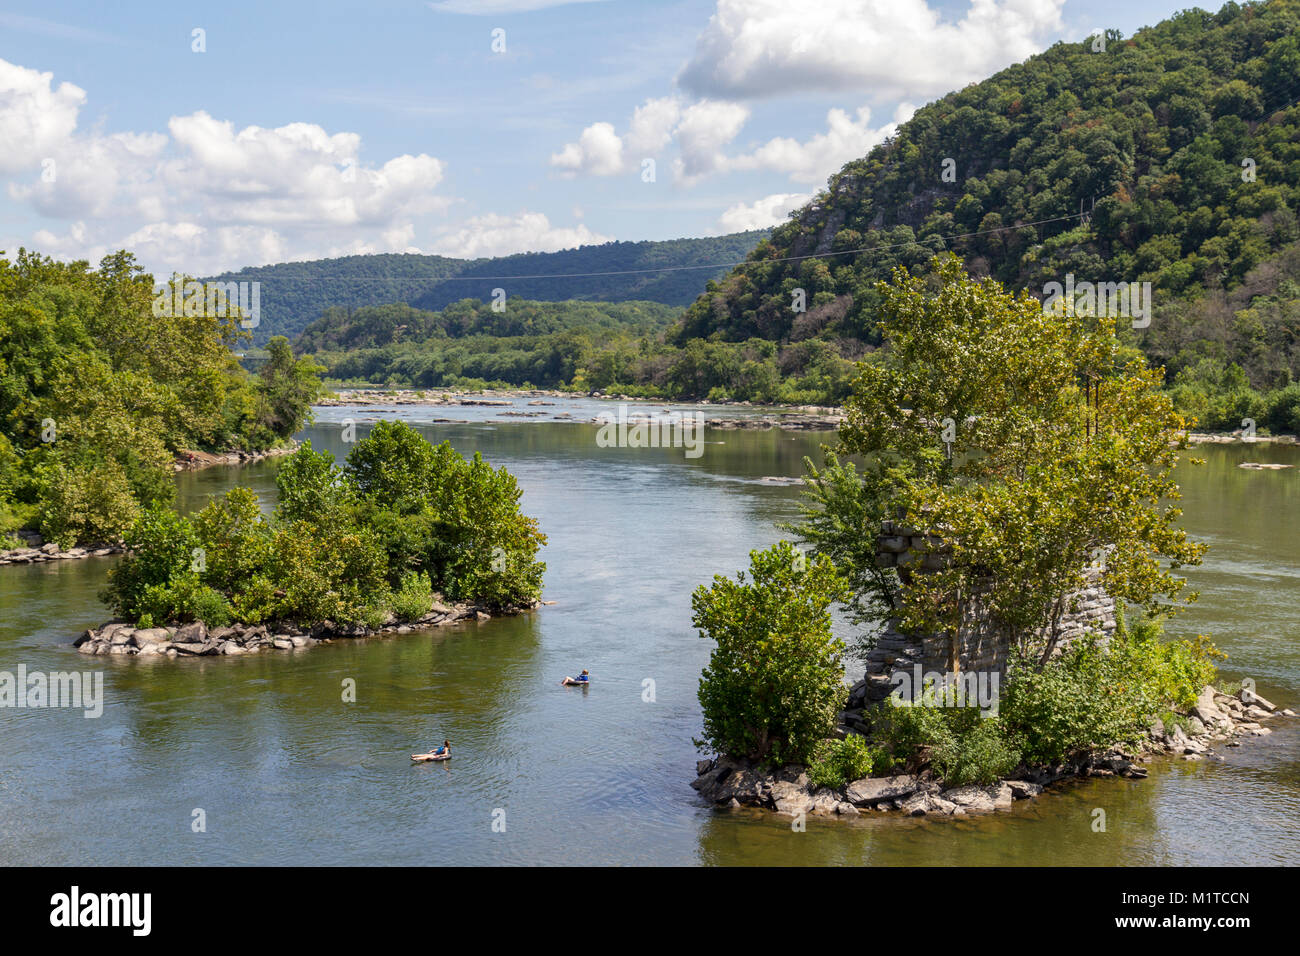 People tubing down the Potomac River, Harper's Ferry National Historic Park, West Virginia, United States. Stock Photo